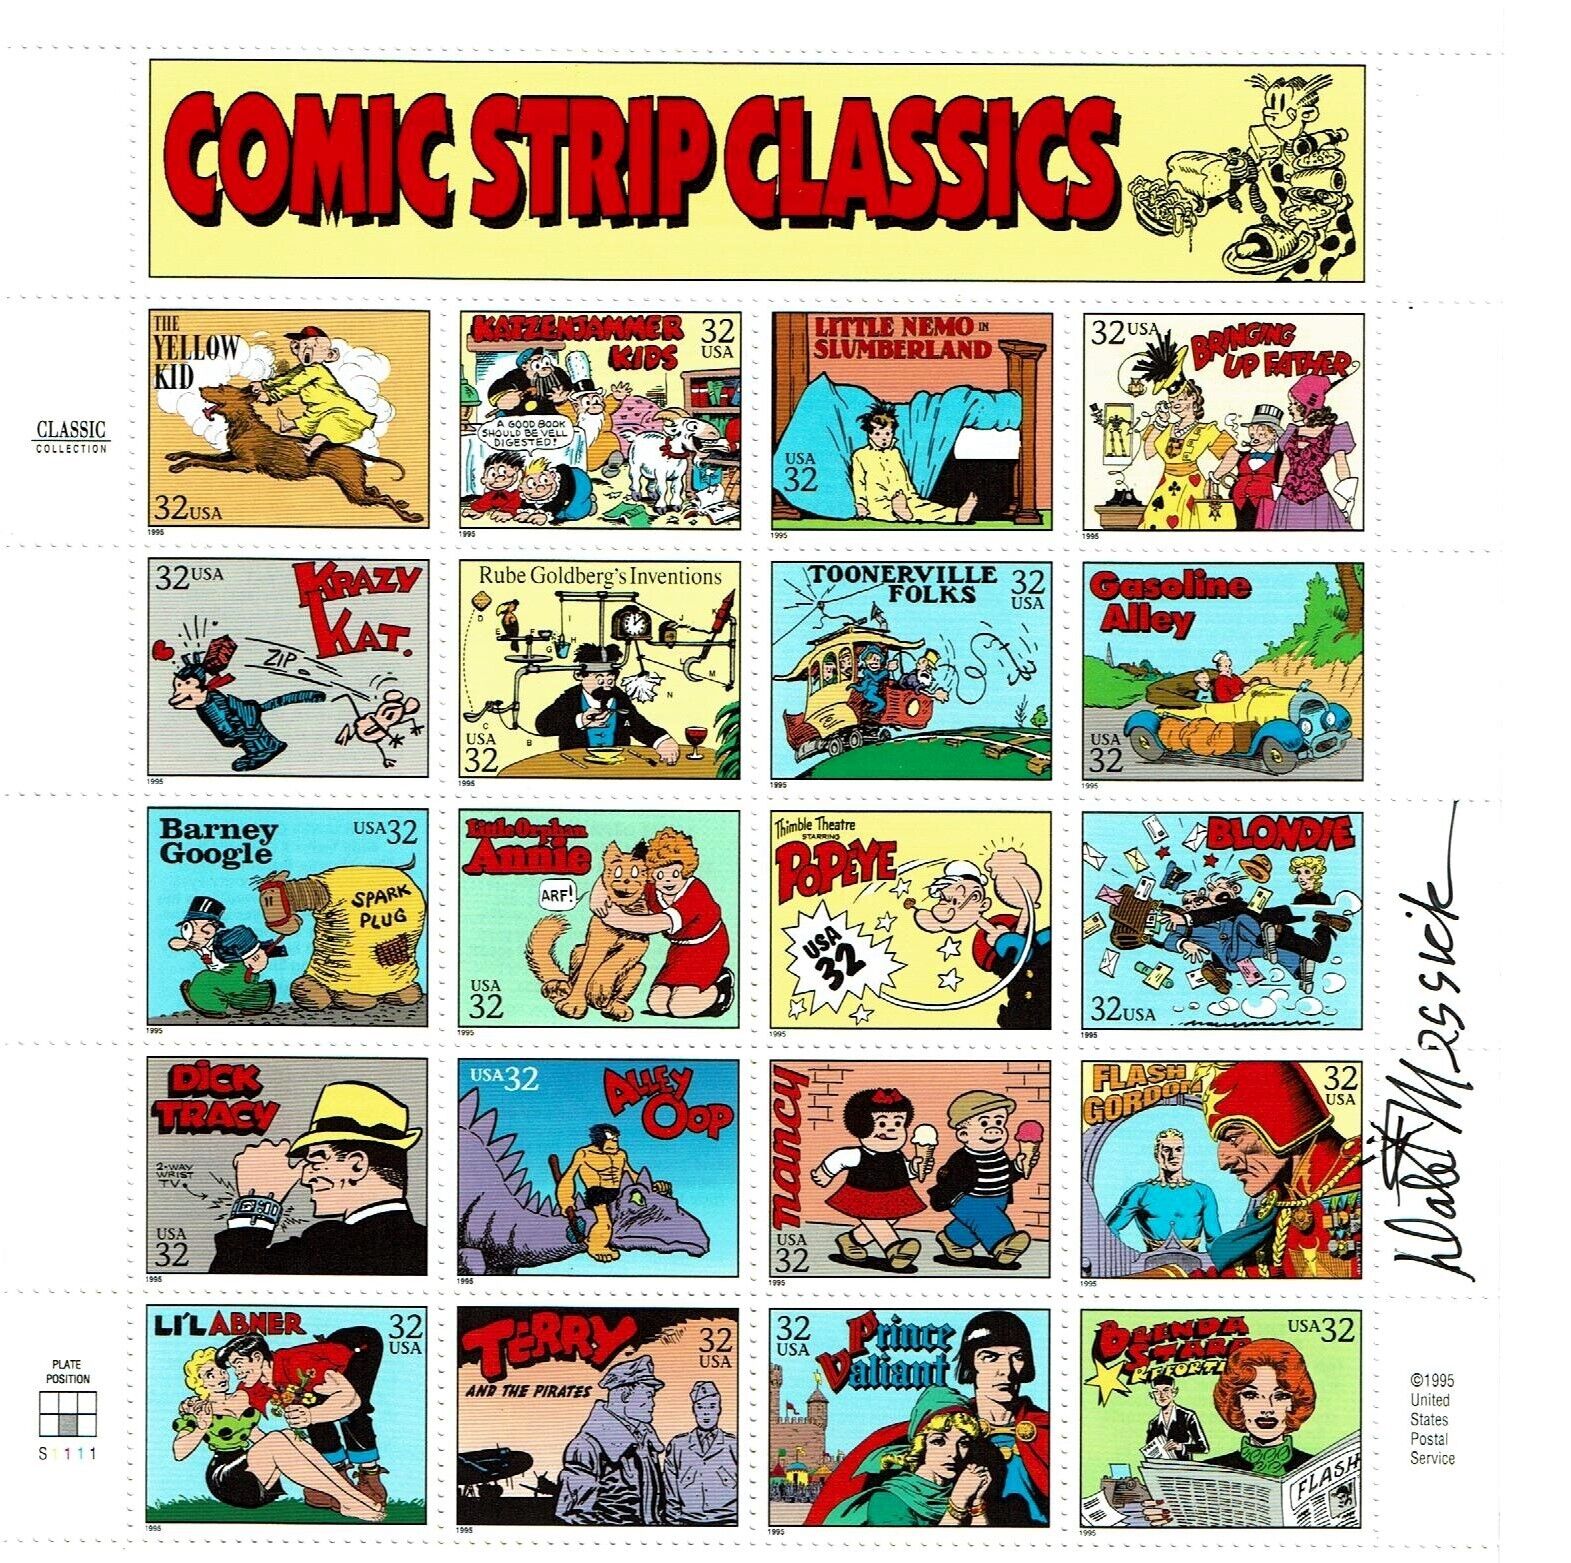 Stamps: Comic Strip Classics, 1995, Scott #3000. signed by Dale Messick, B. Star